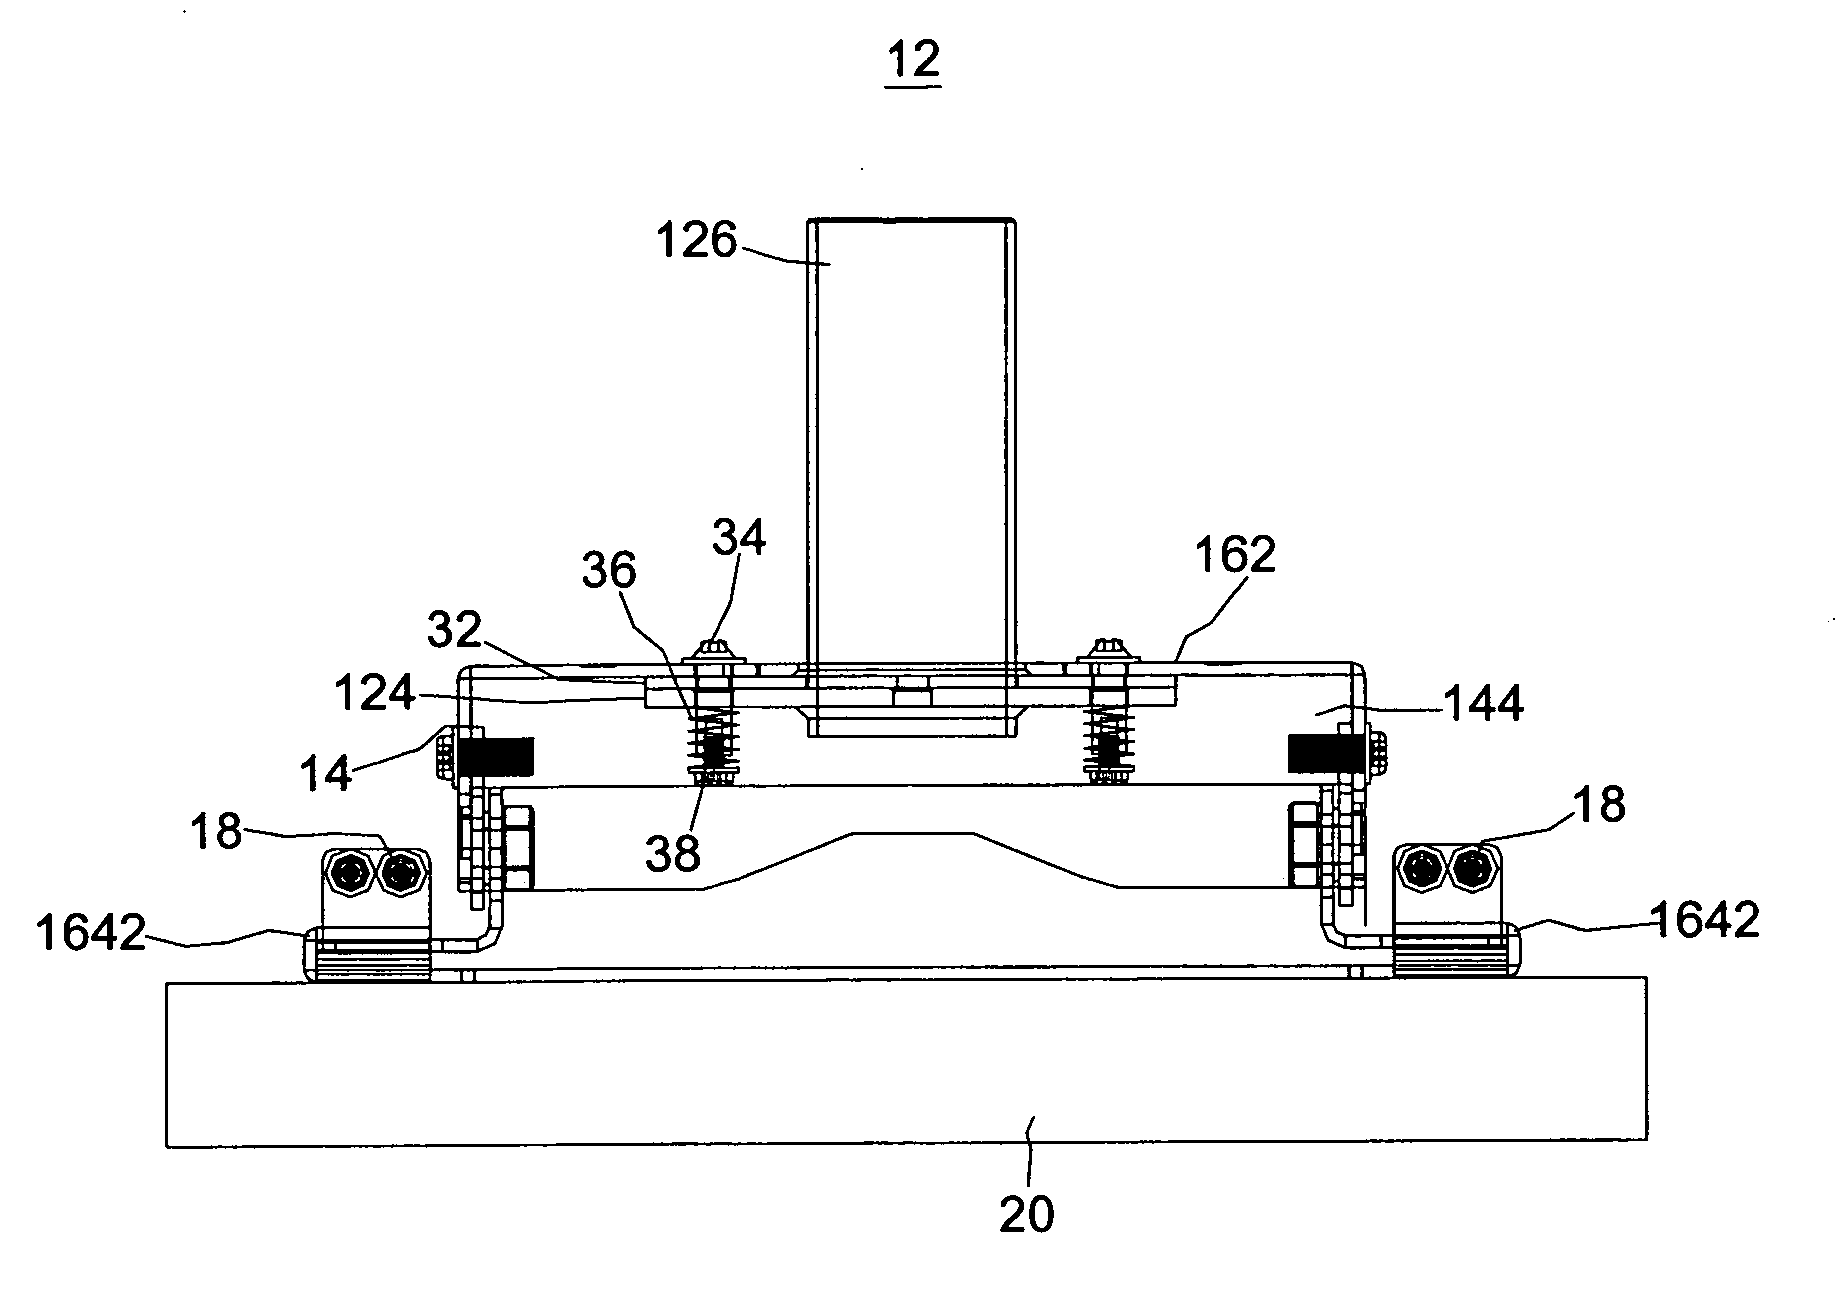 Structure for hanging an electronic device